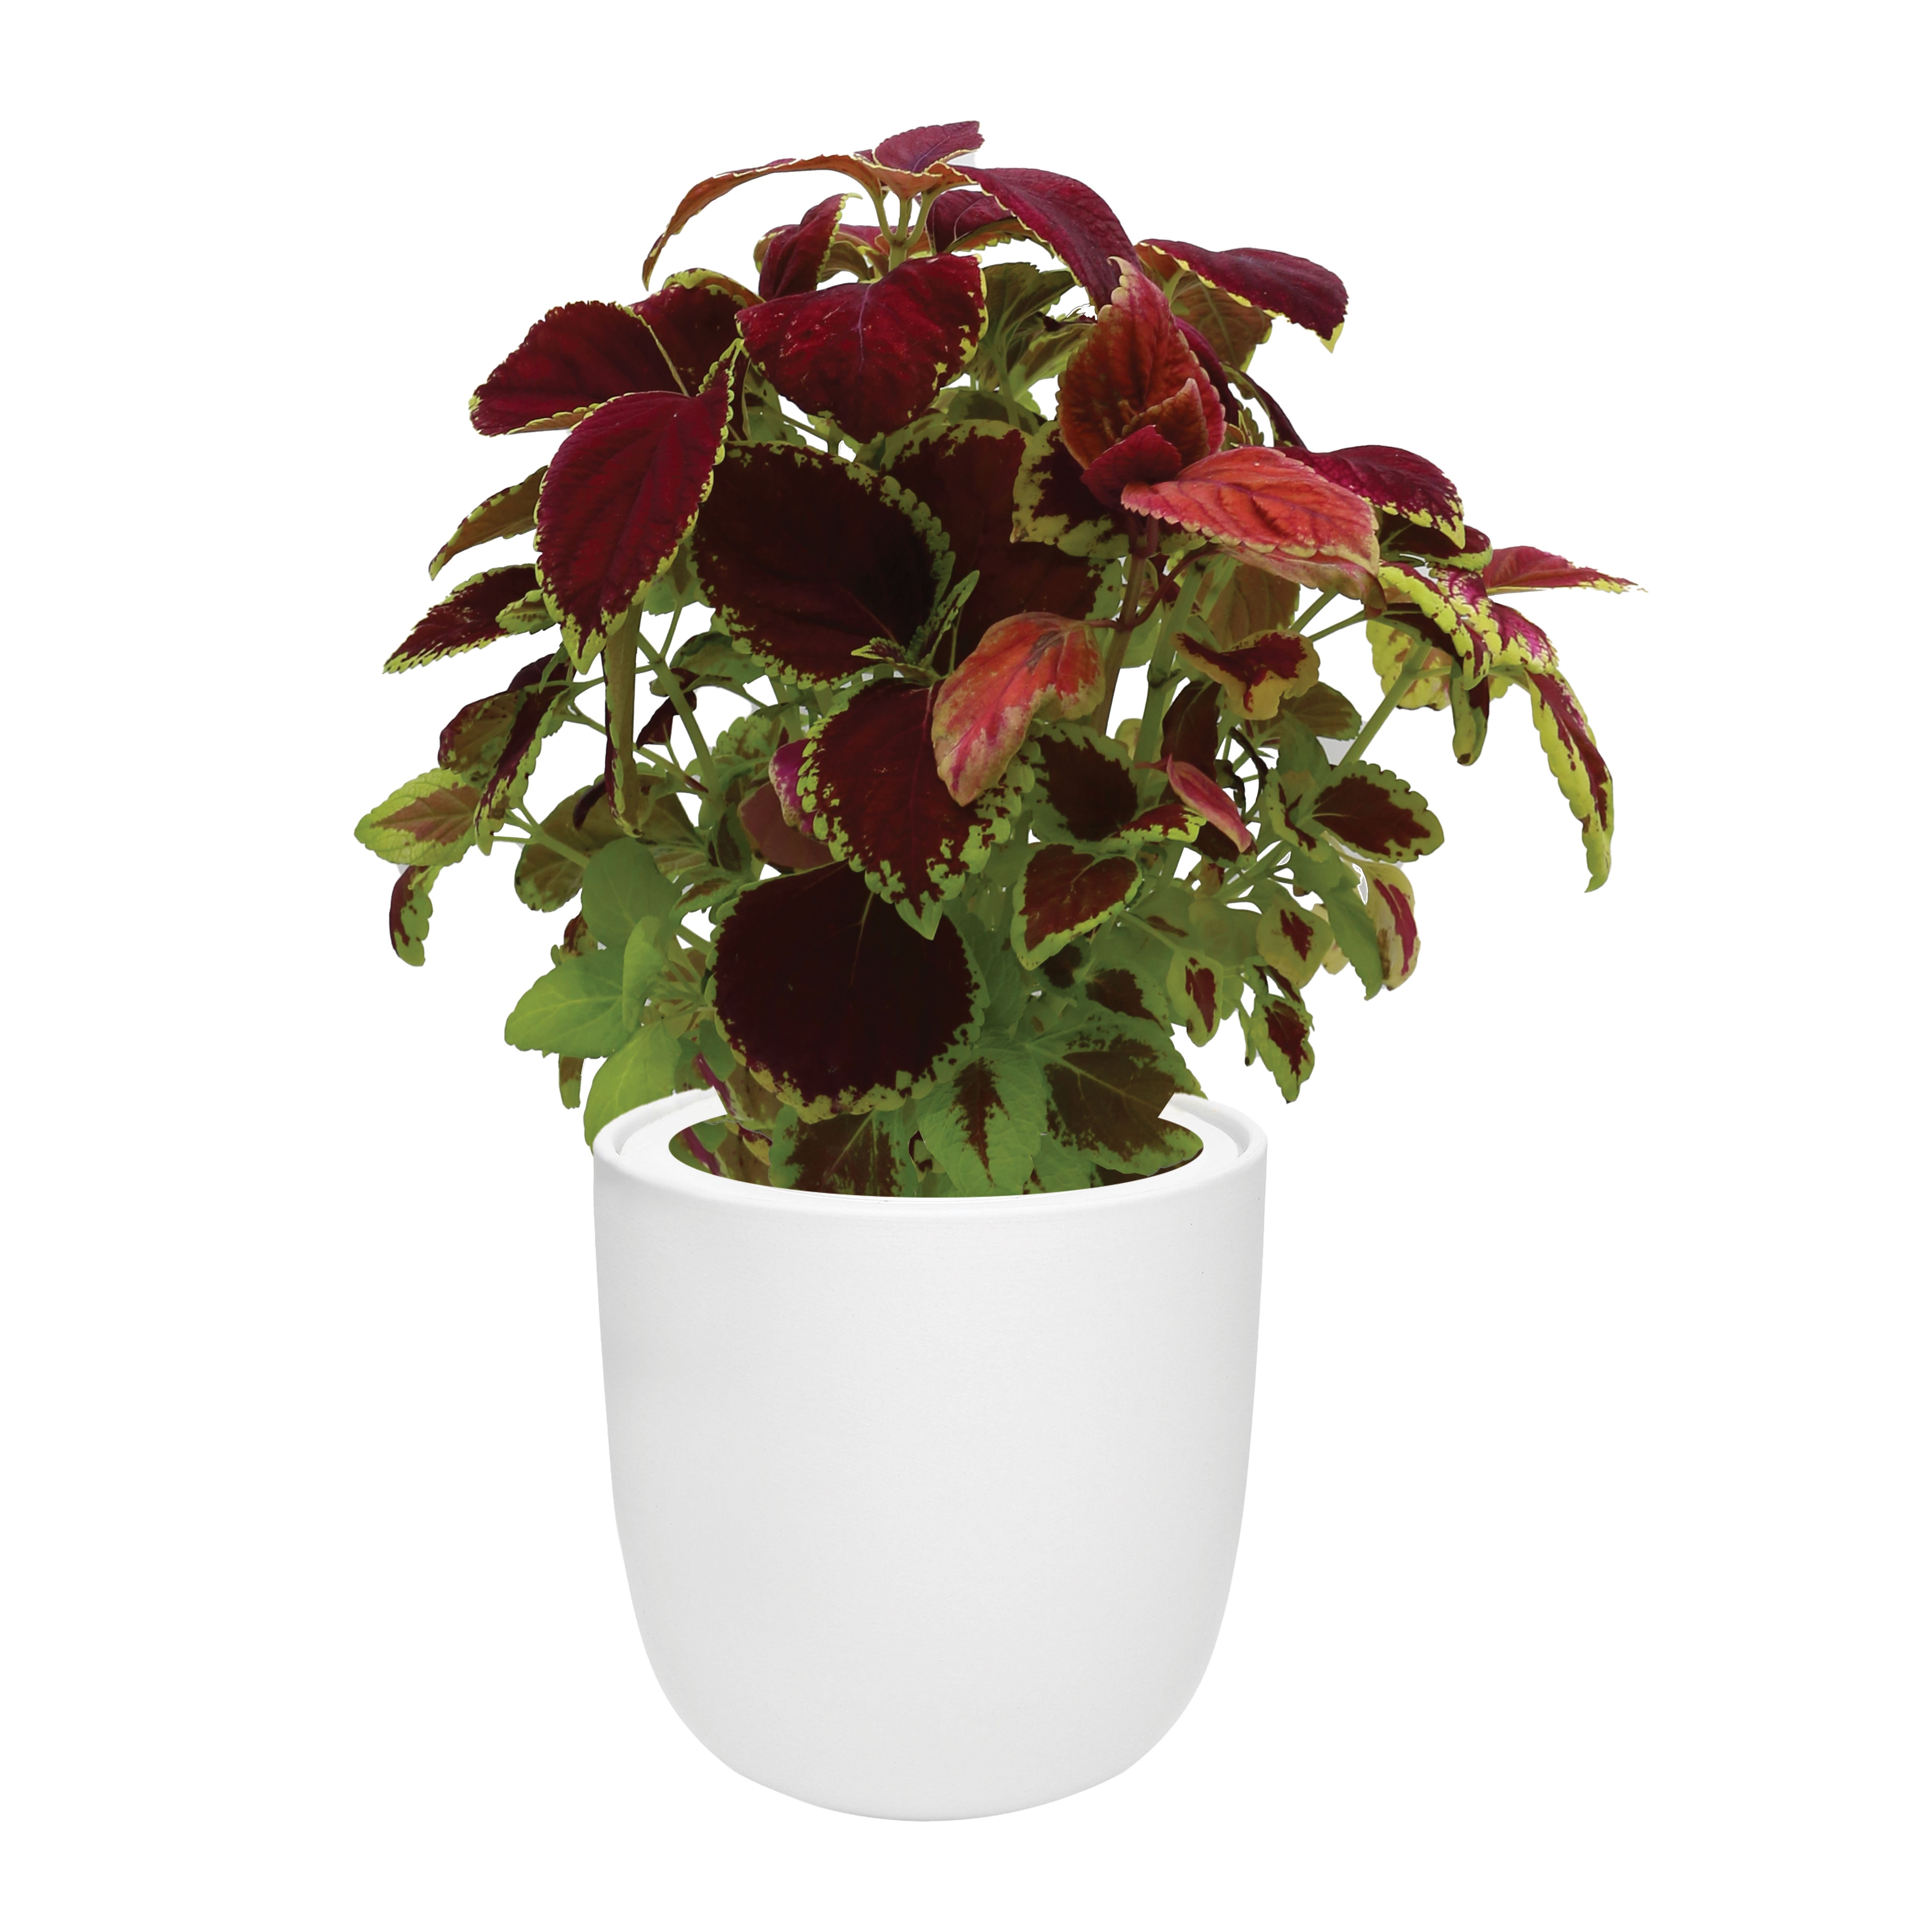 Coleus White Ceramic Pot Hydroponic Growing Kit with Seeds